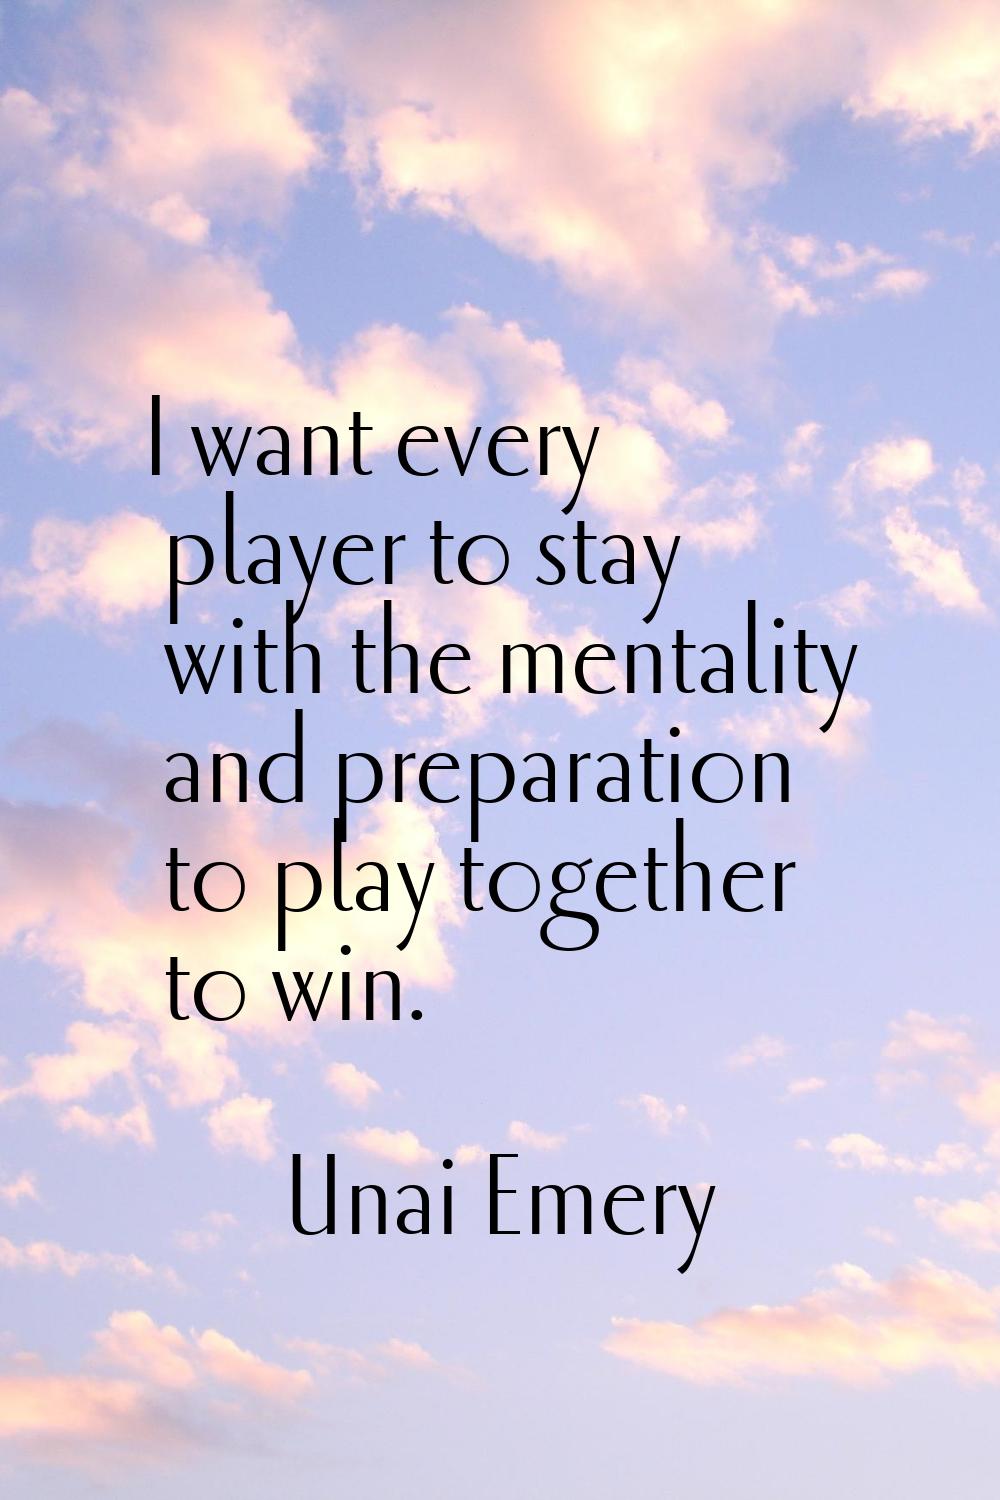 I want every player to stay with the mentality and preparation to play together to win.